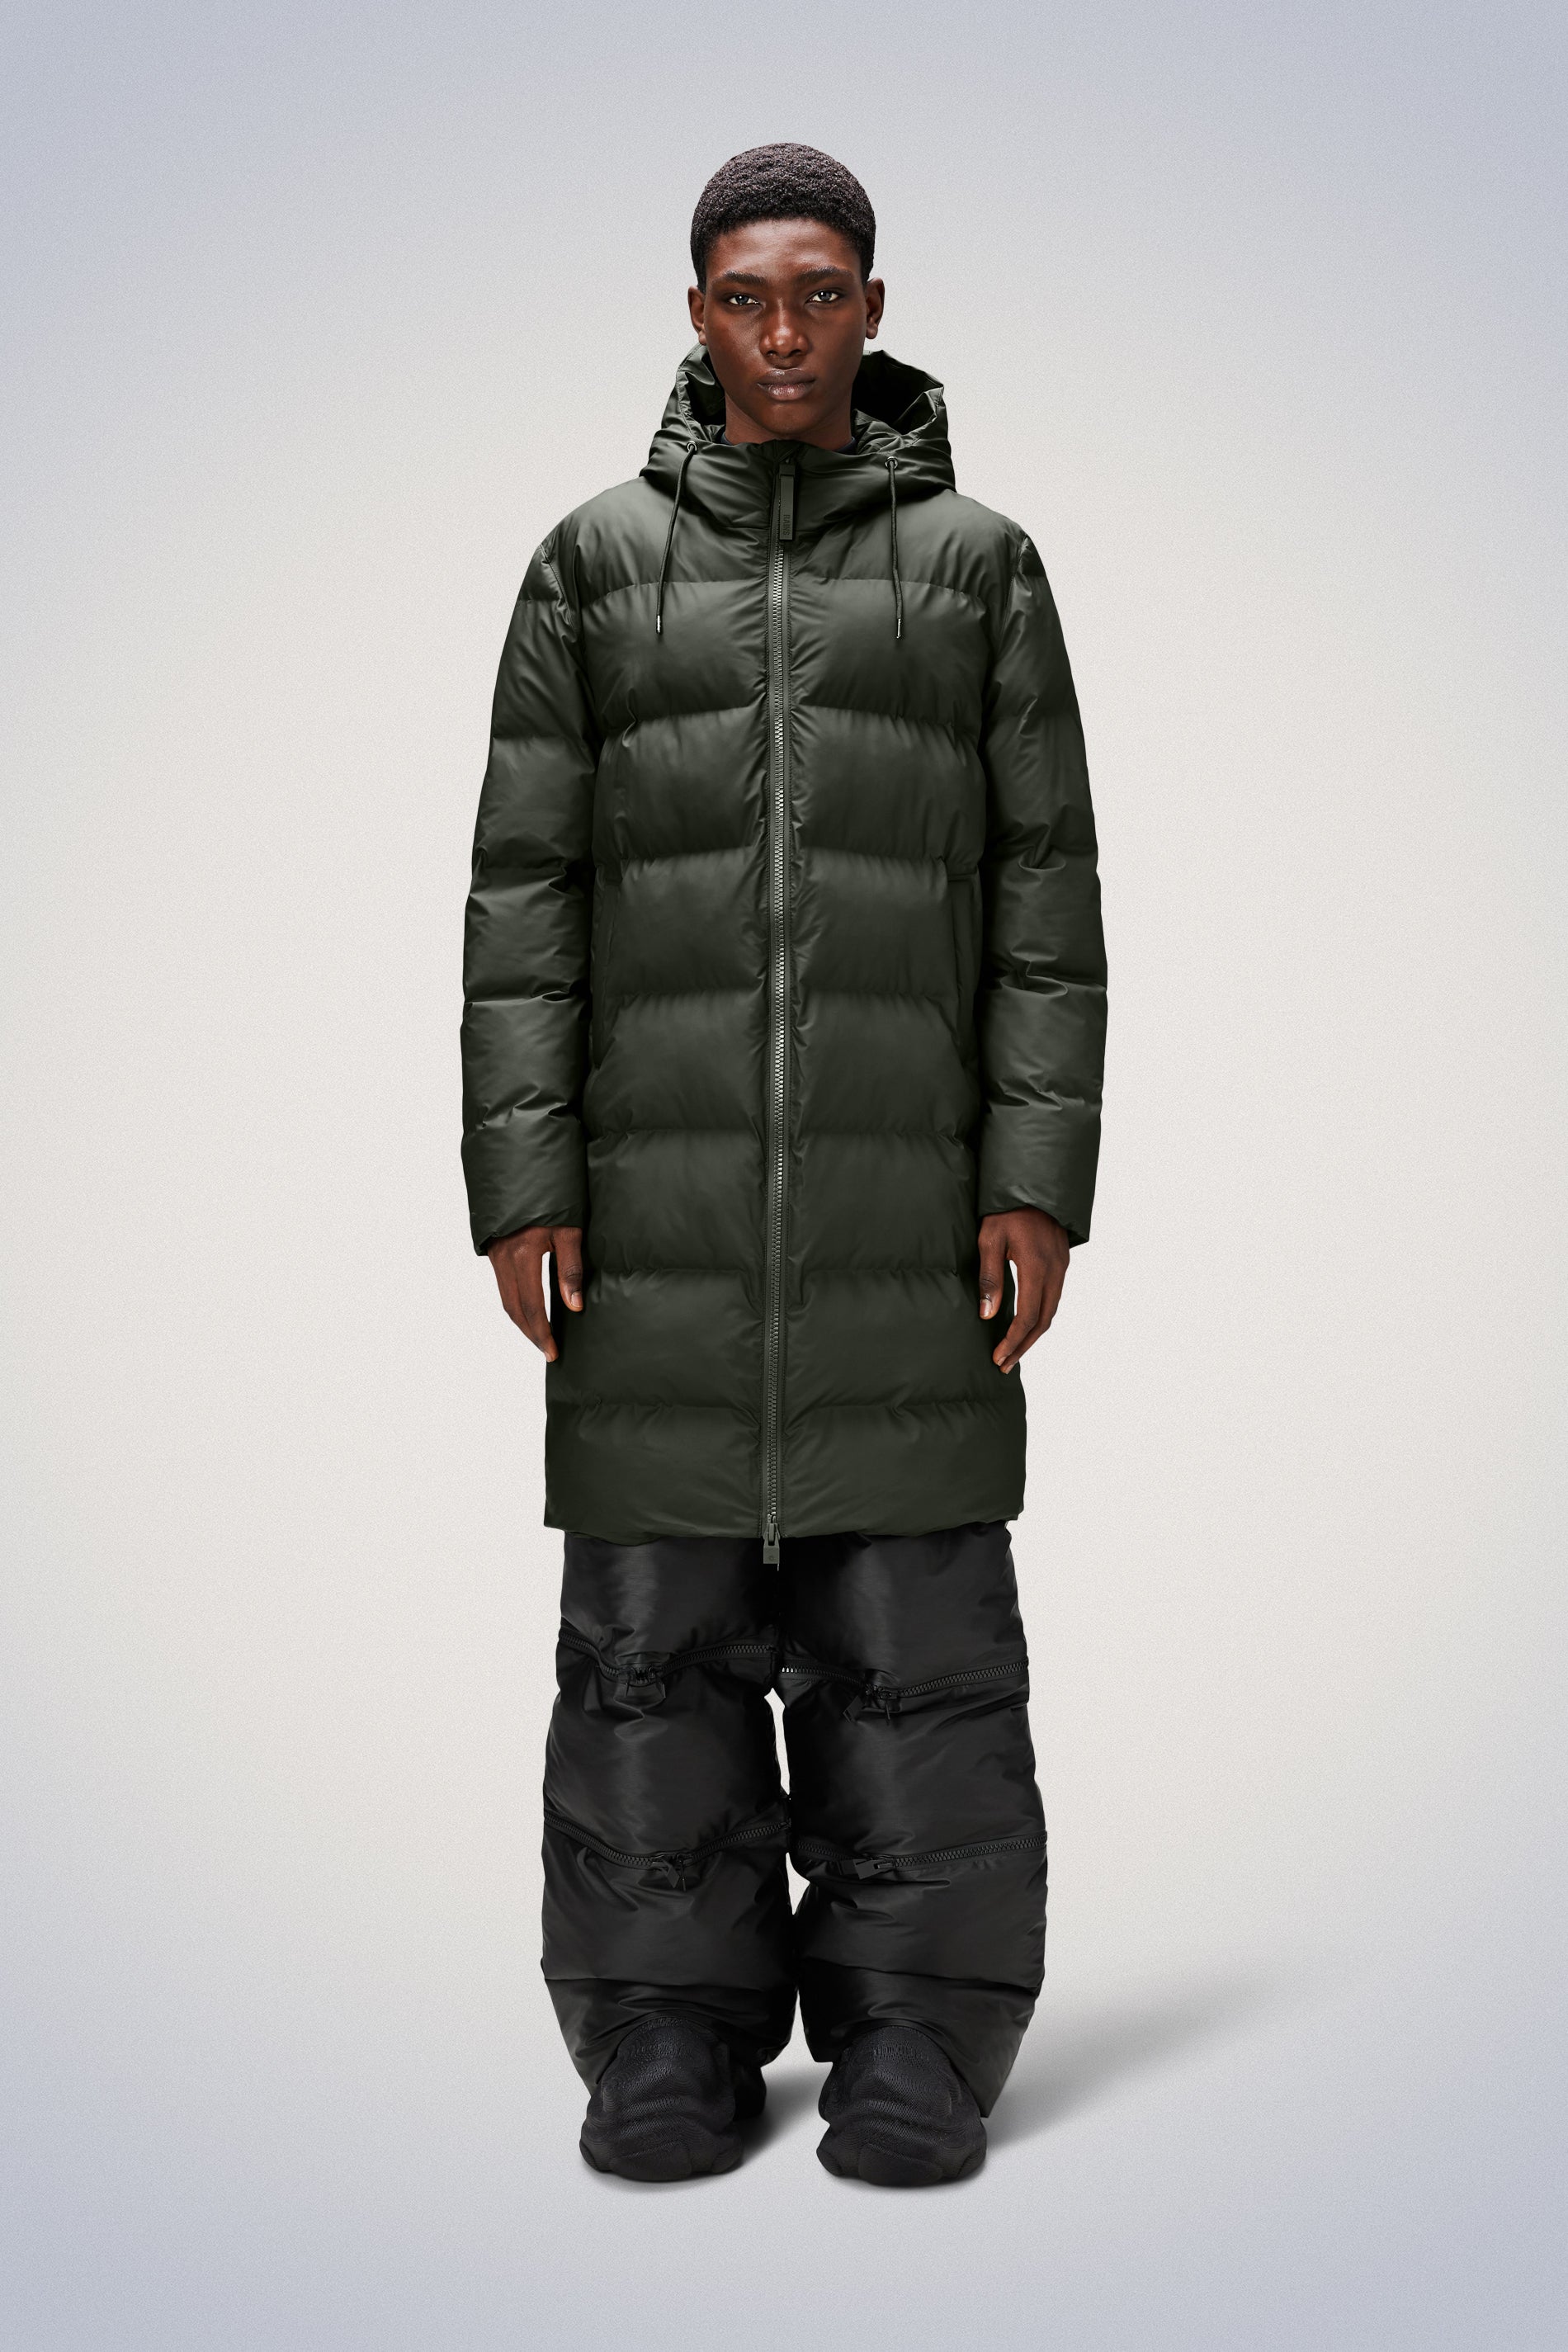 Rains® Alta Puffer Jacket in Navy for $430